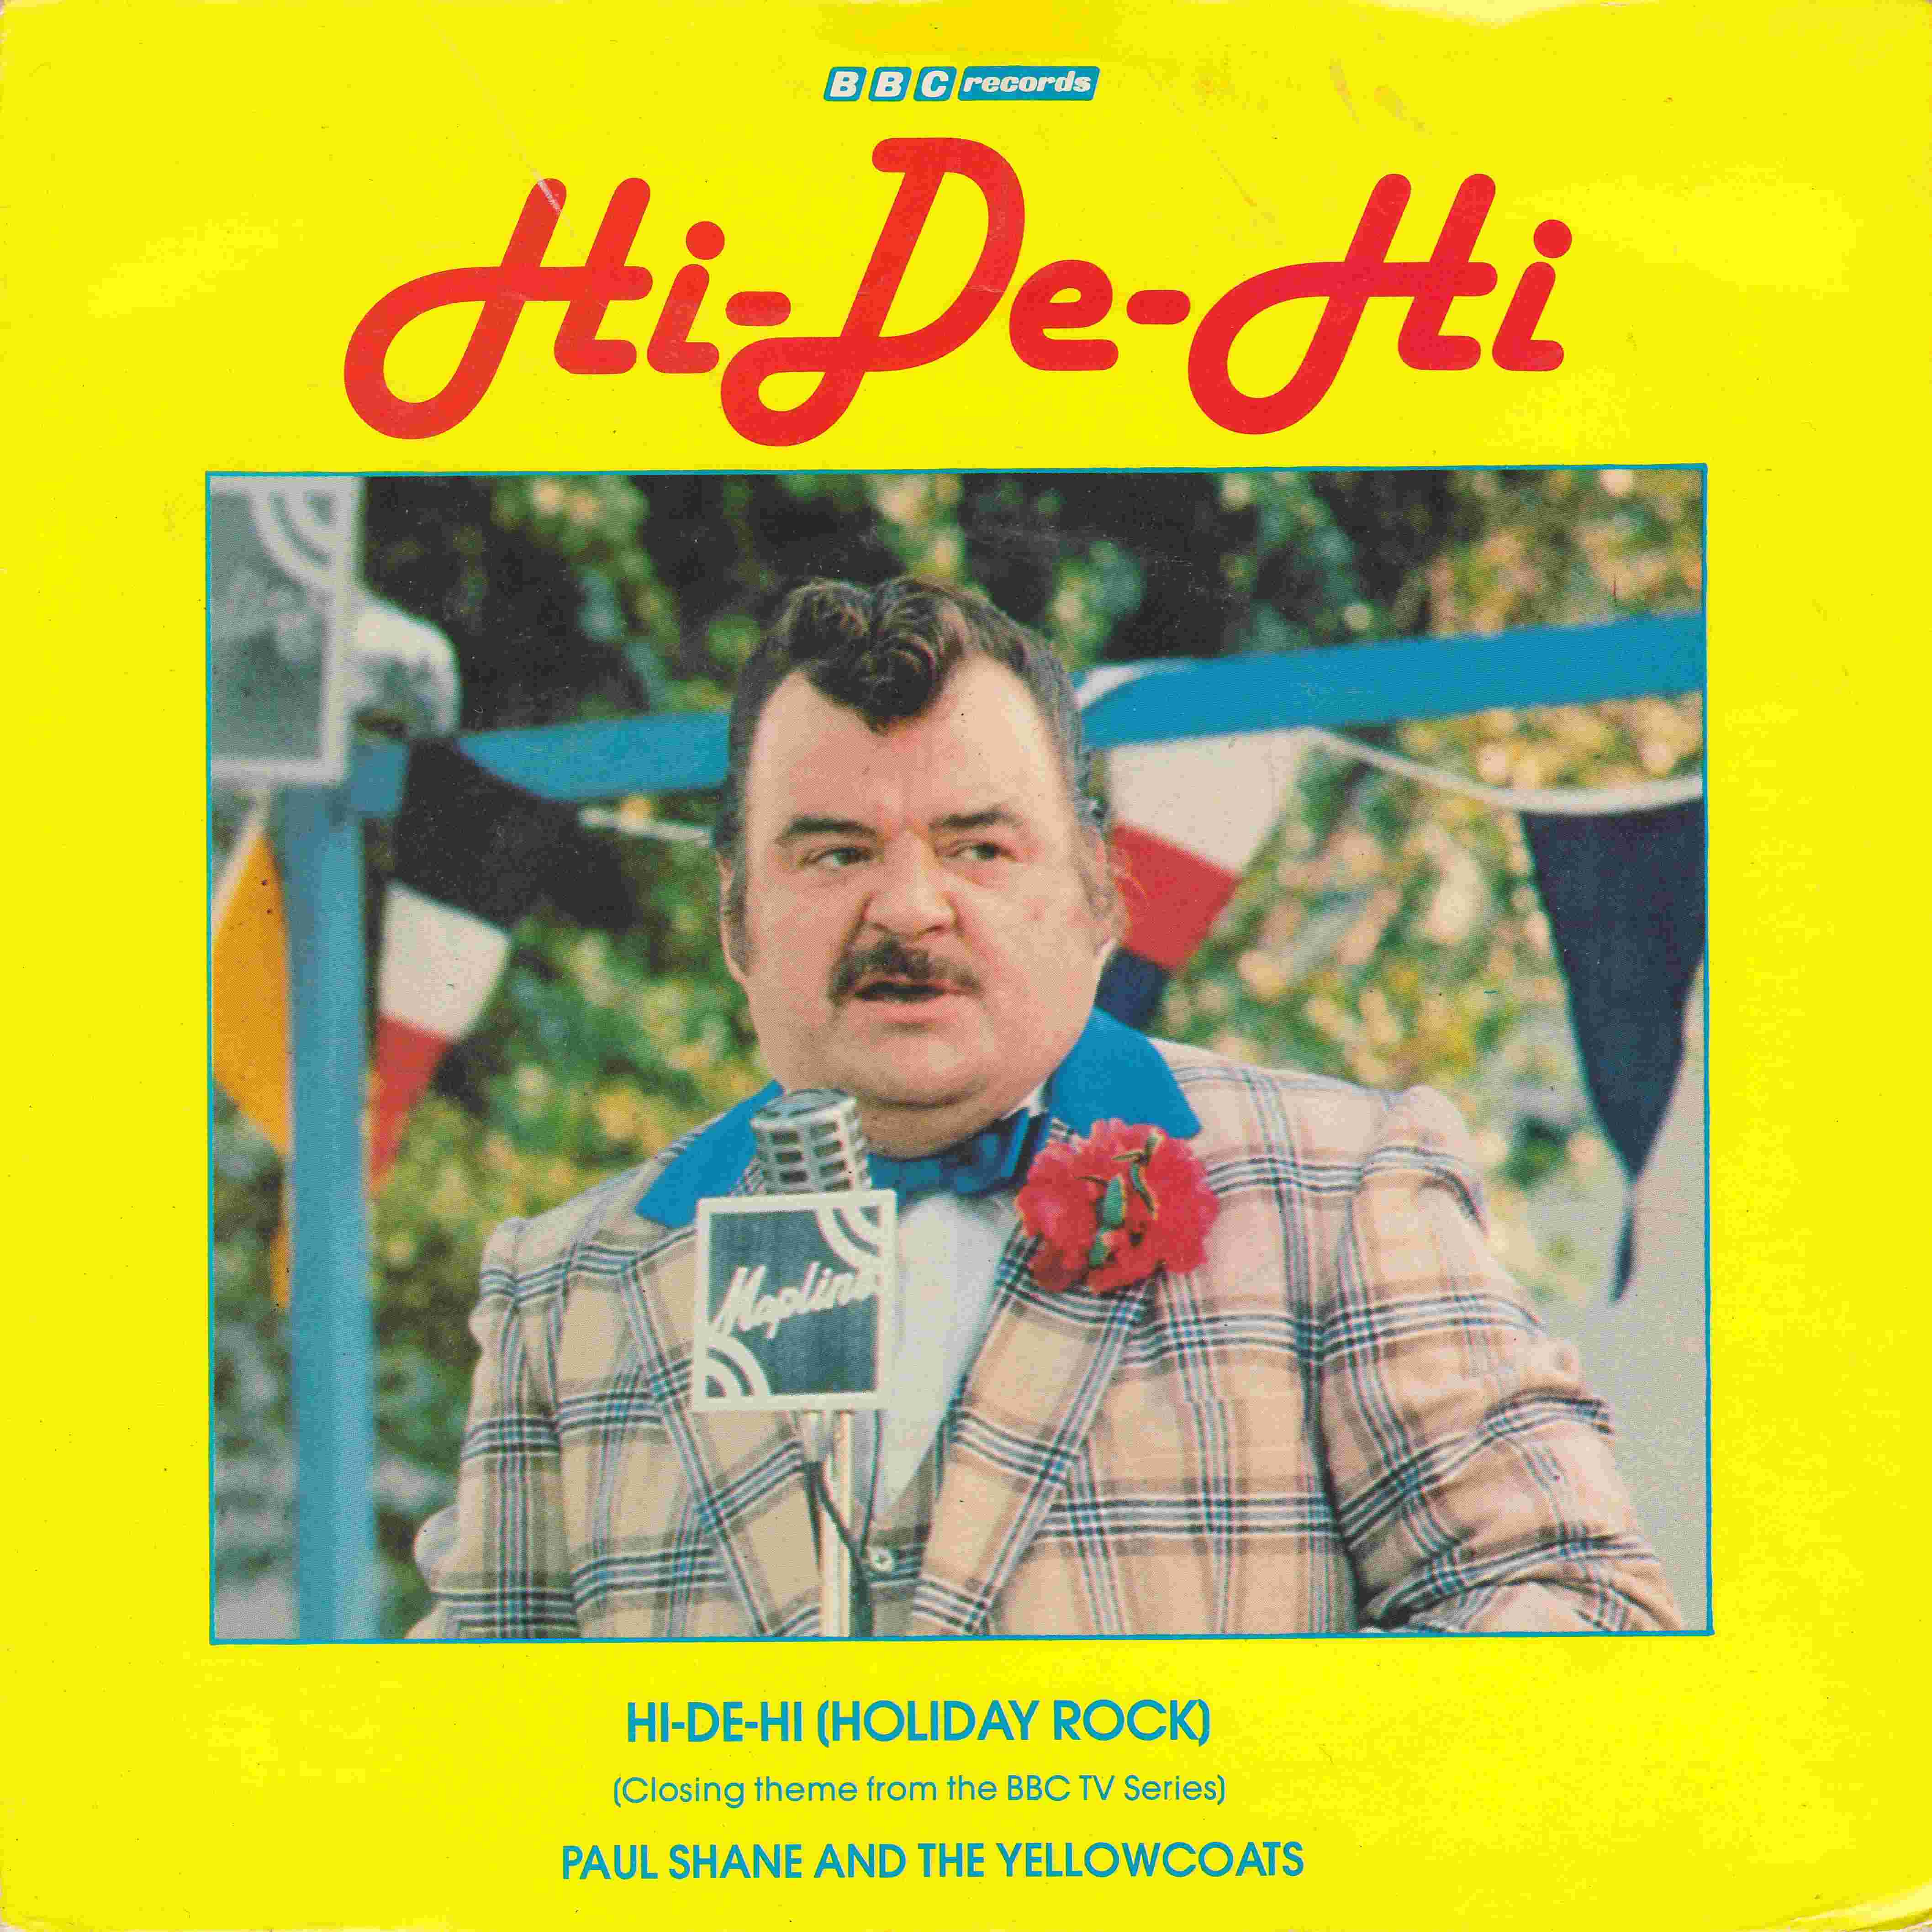 Picture of RESL 103 Holiday rock (Hi-de-hi) by artist Jimmy Perry / Paul Greedus / Paul Shane from the BBC records and Tapes library